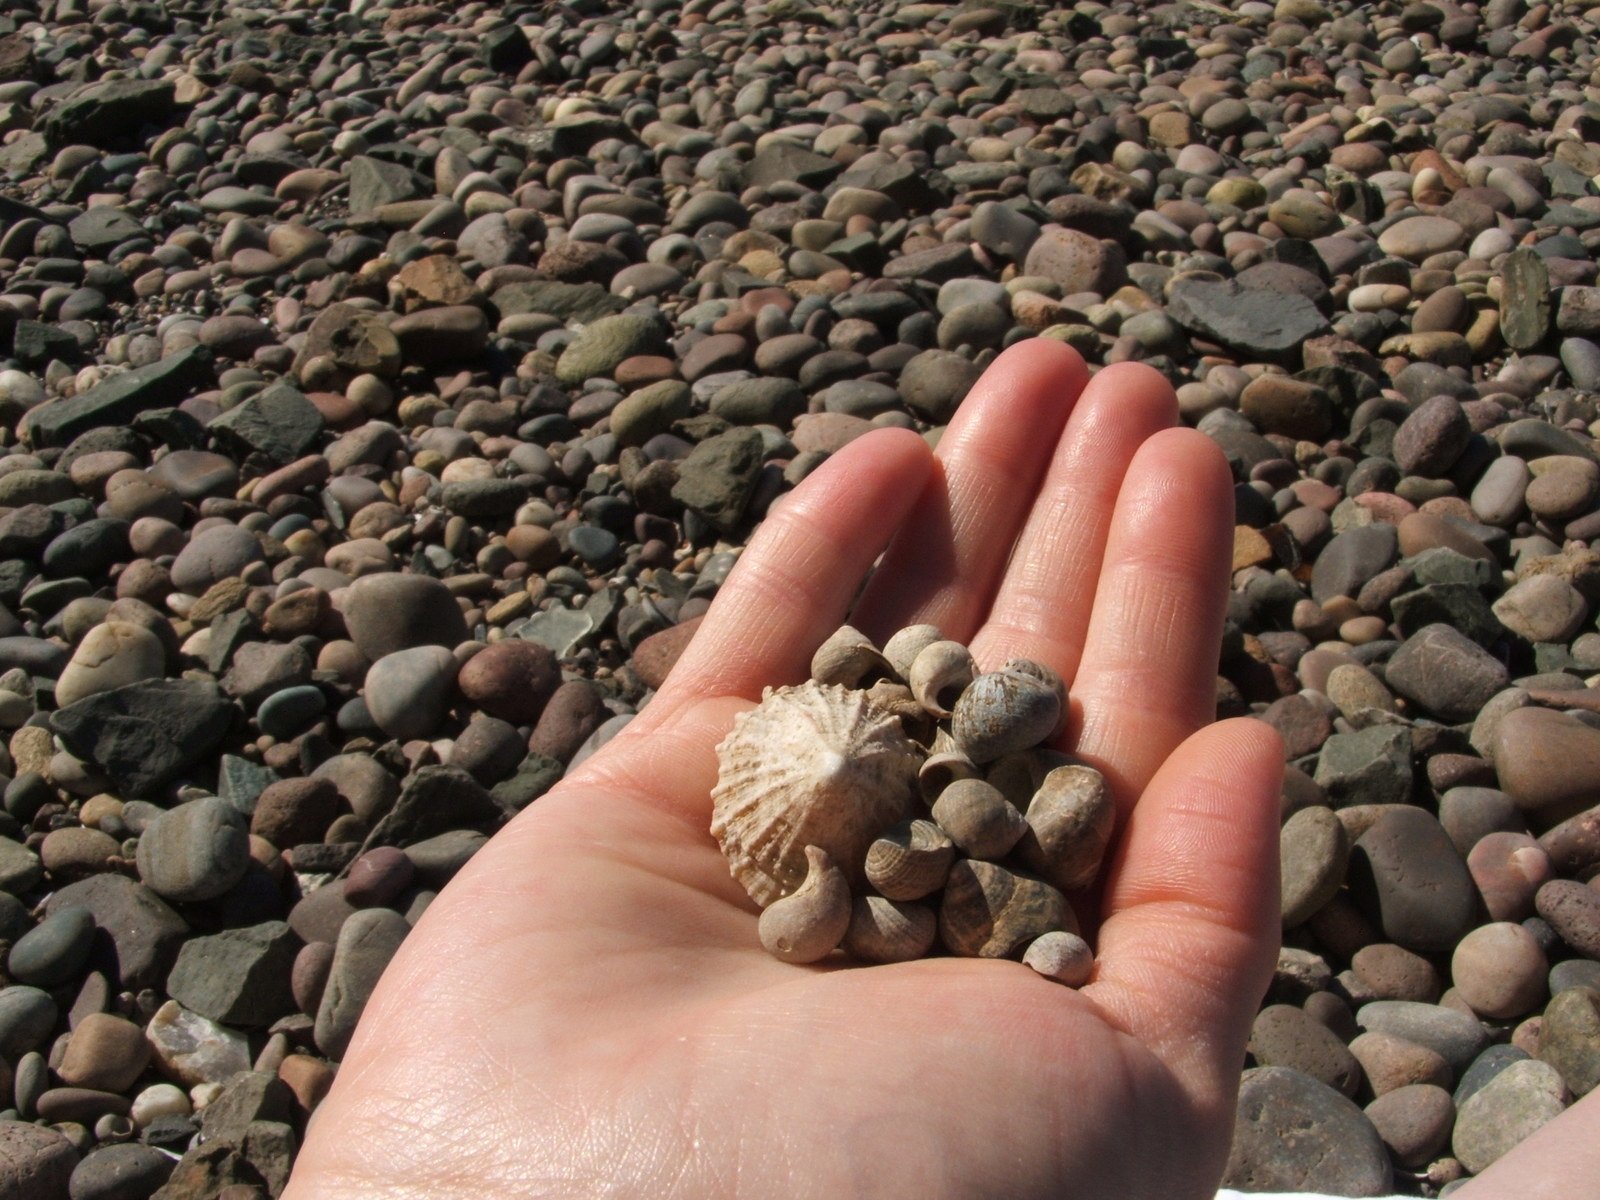 the small shells are in someones hand on the beach